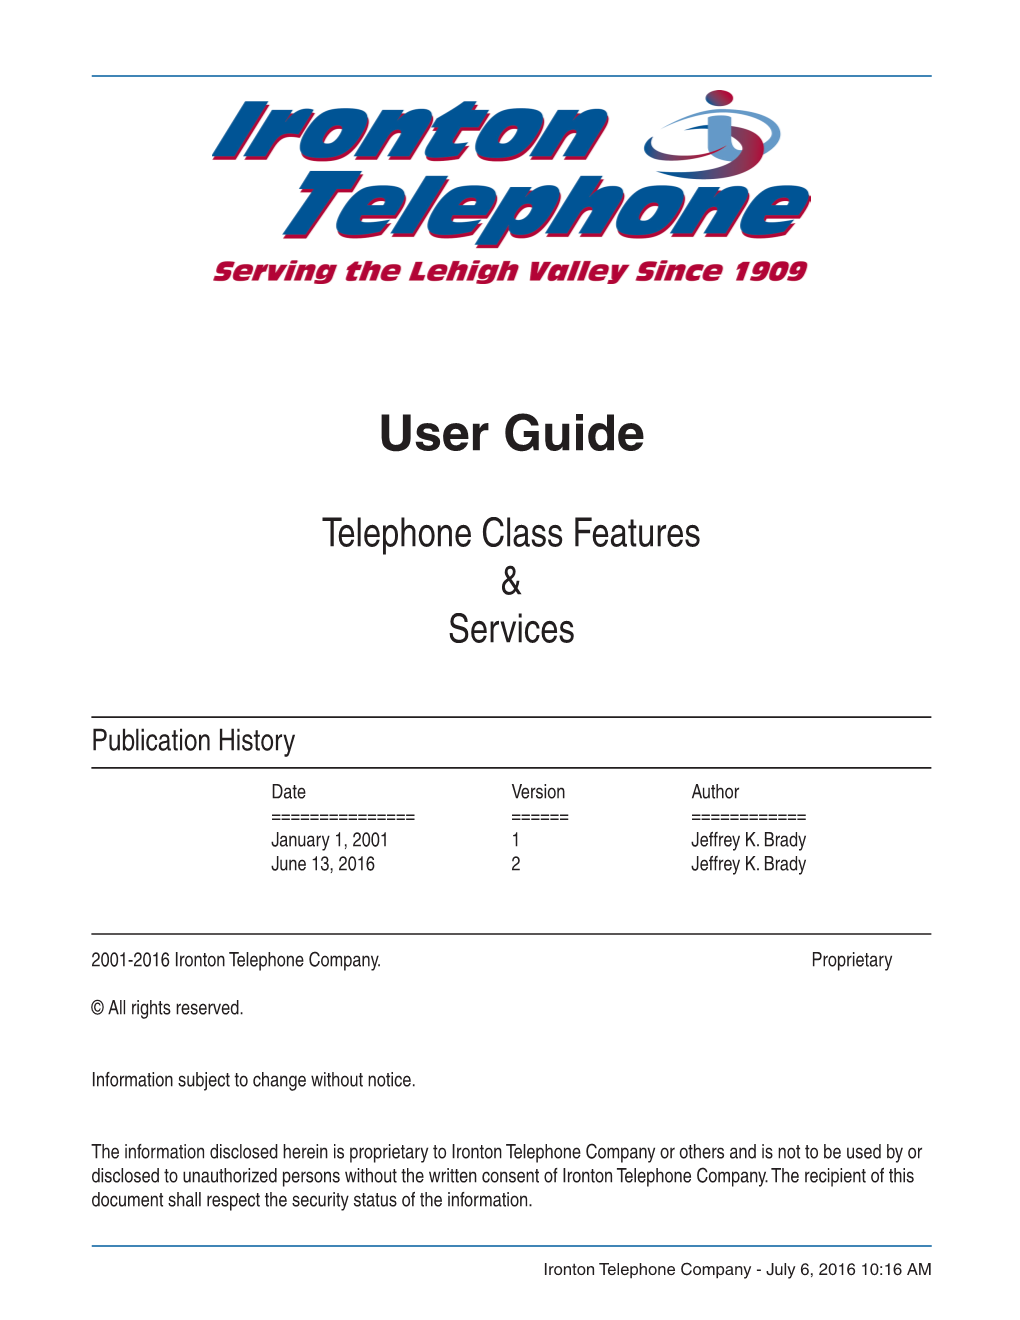 Feature & Services User Guide